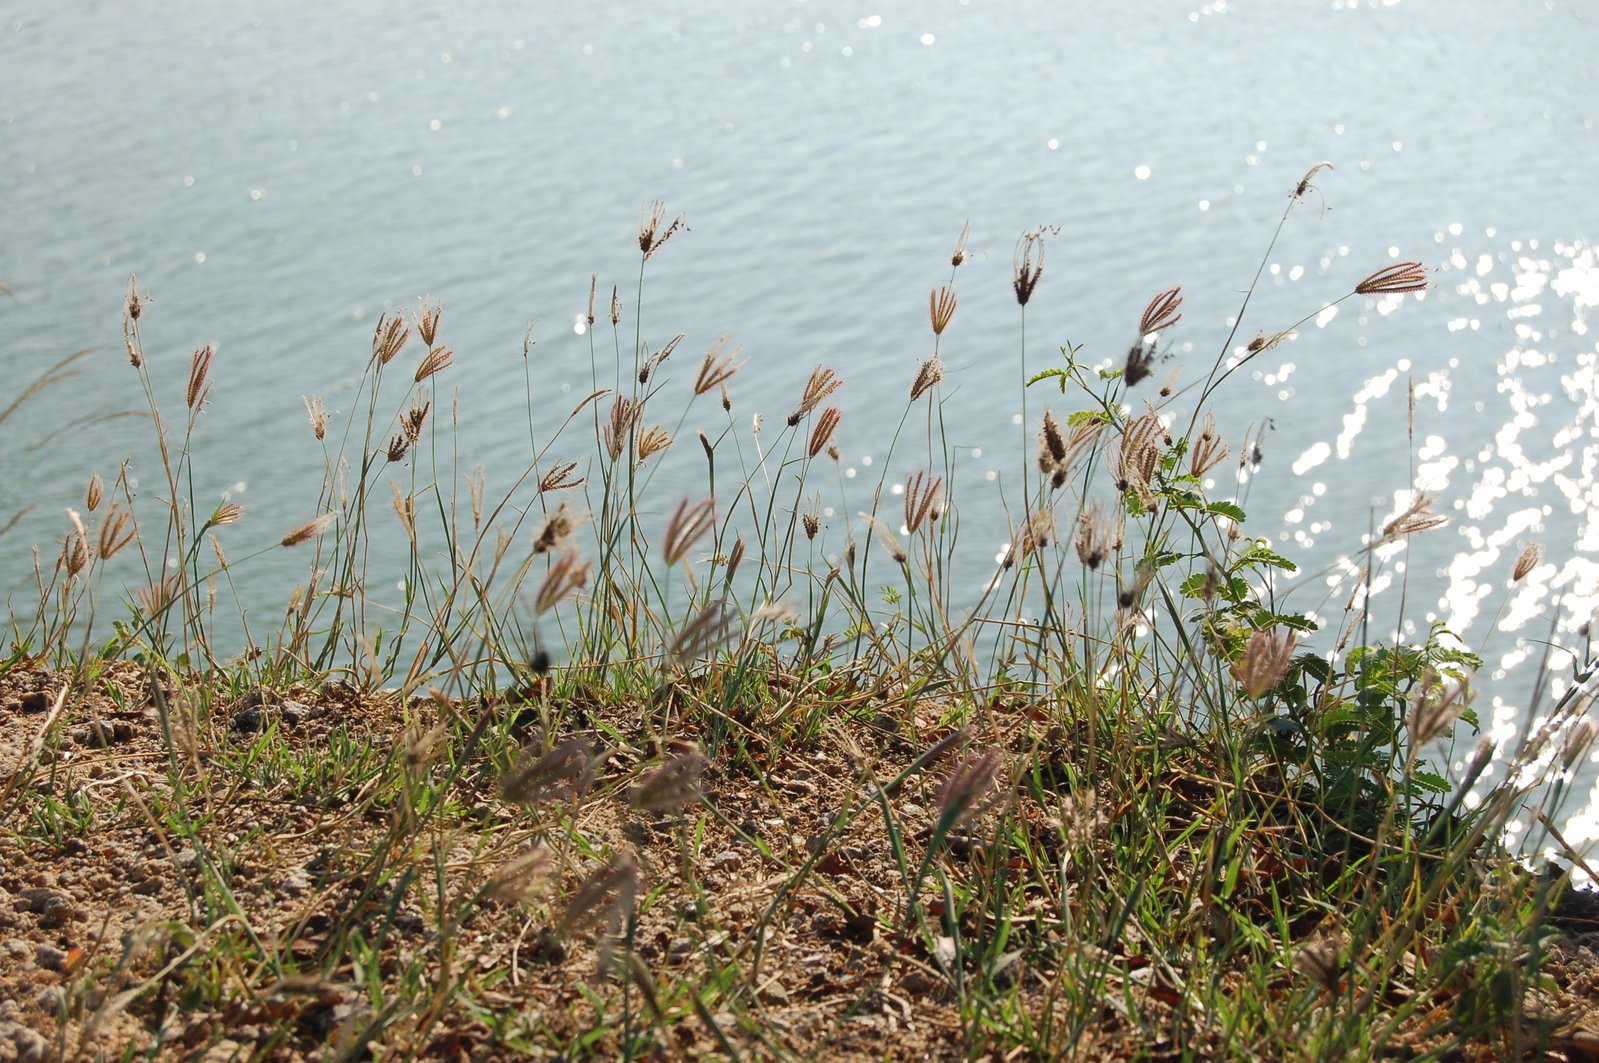 reeds are blowing in the wind in front of water